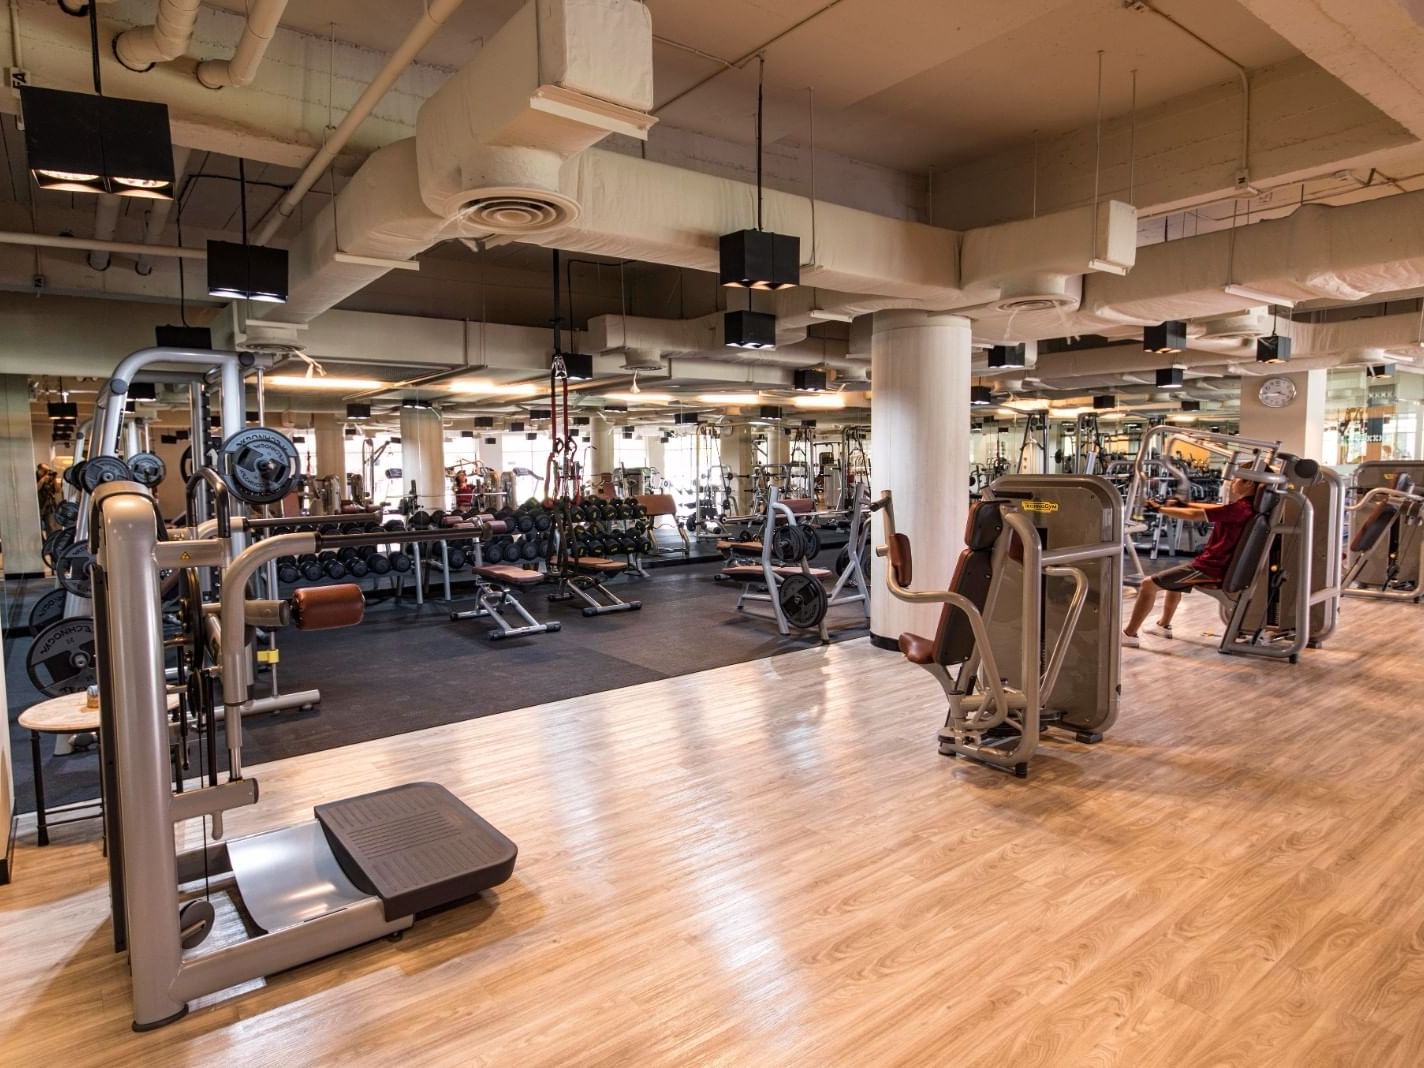 Well equipped fitness center at Eastin Hotels